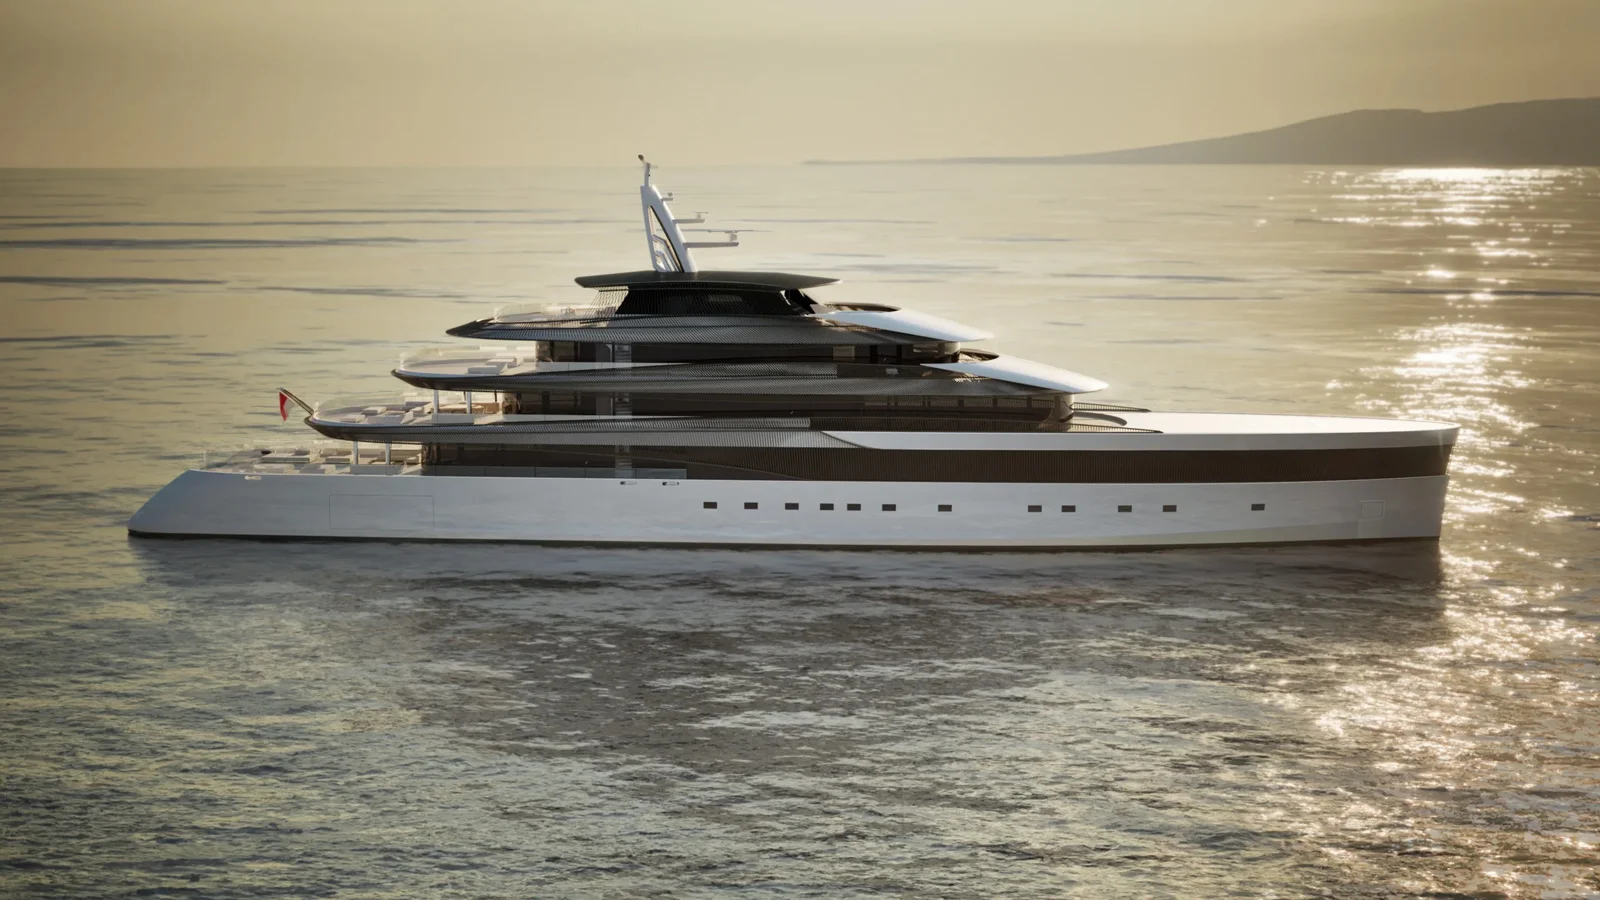 Proteus by The A Group: The concept named after Poseidon’s son features authentic design, hull integrity and determination “to evolve with the clients’ needs in an ever-changing social and environmental climate”